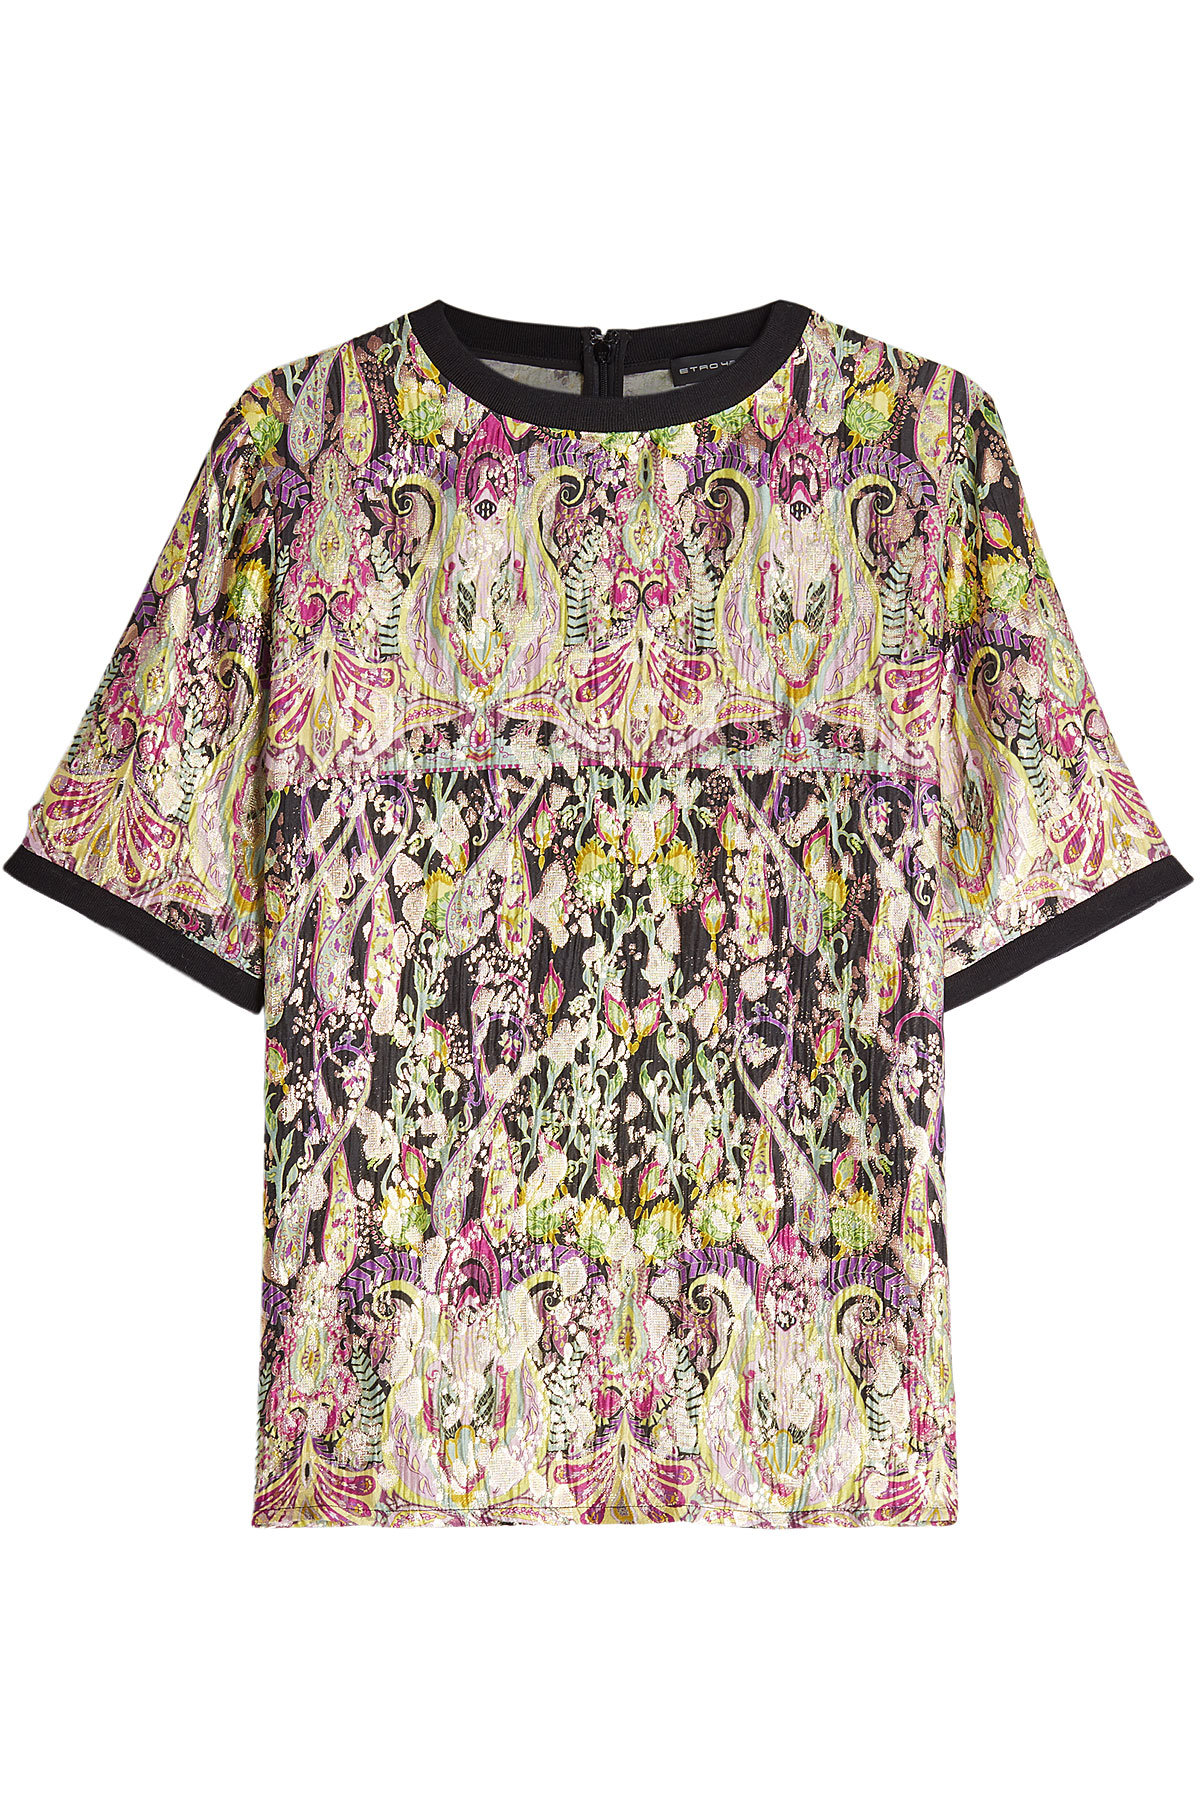 Etro - Printed Top with Silk and Metallic Thread